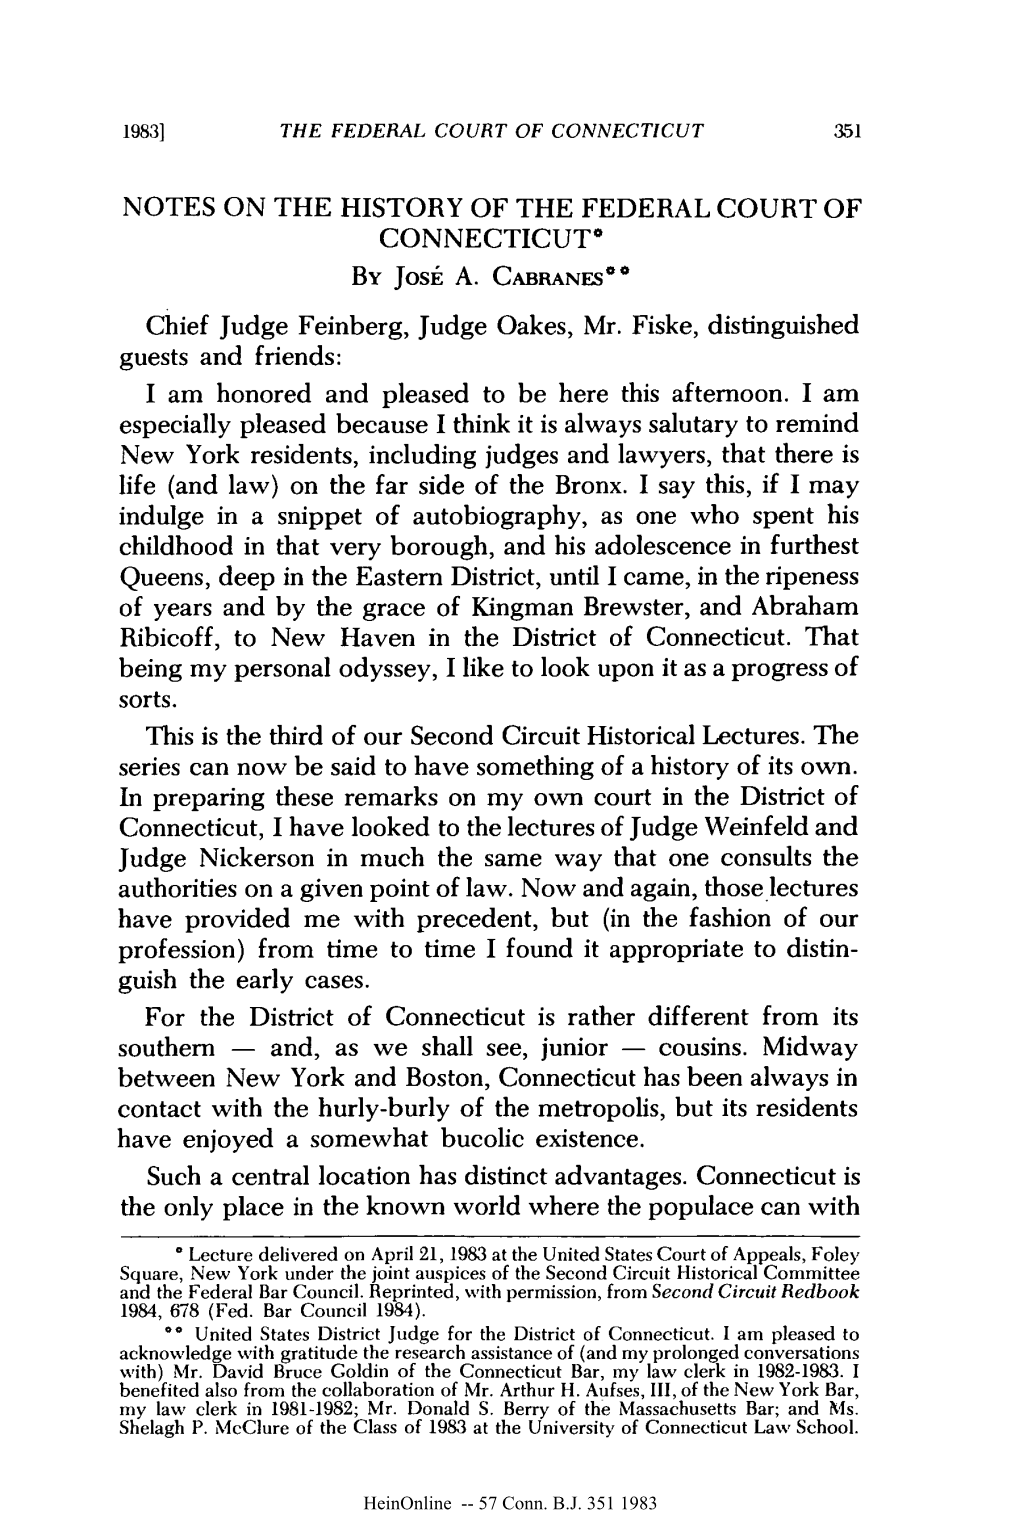 NOTES on the HISTORY of the FEDERAL COURT of CONNECTICUT* by Josk A